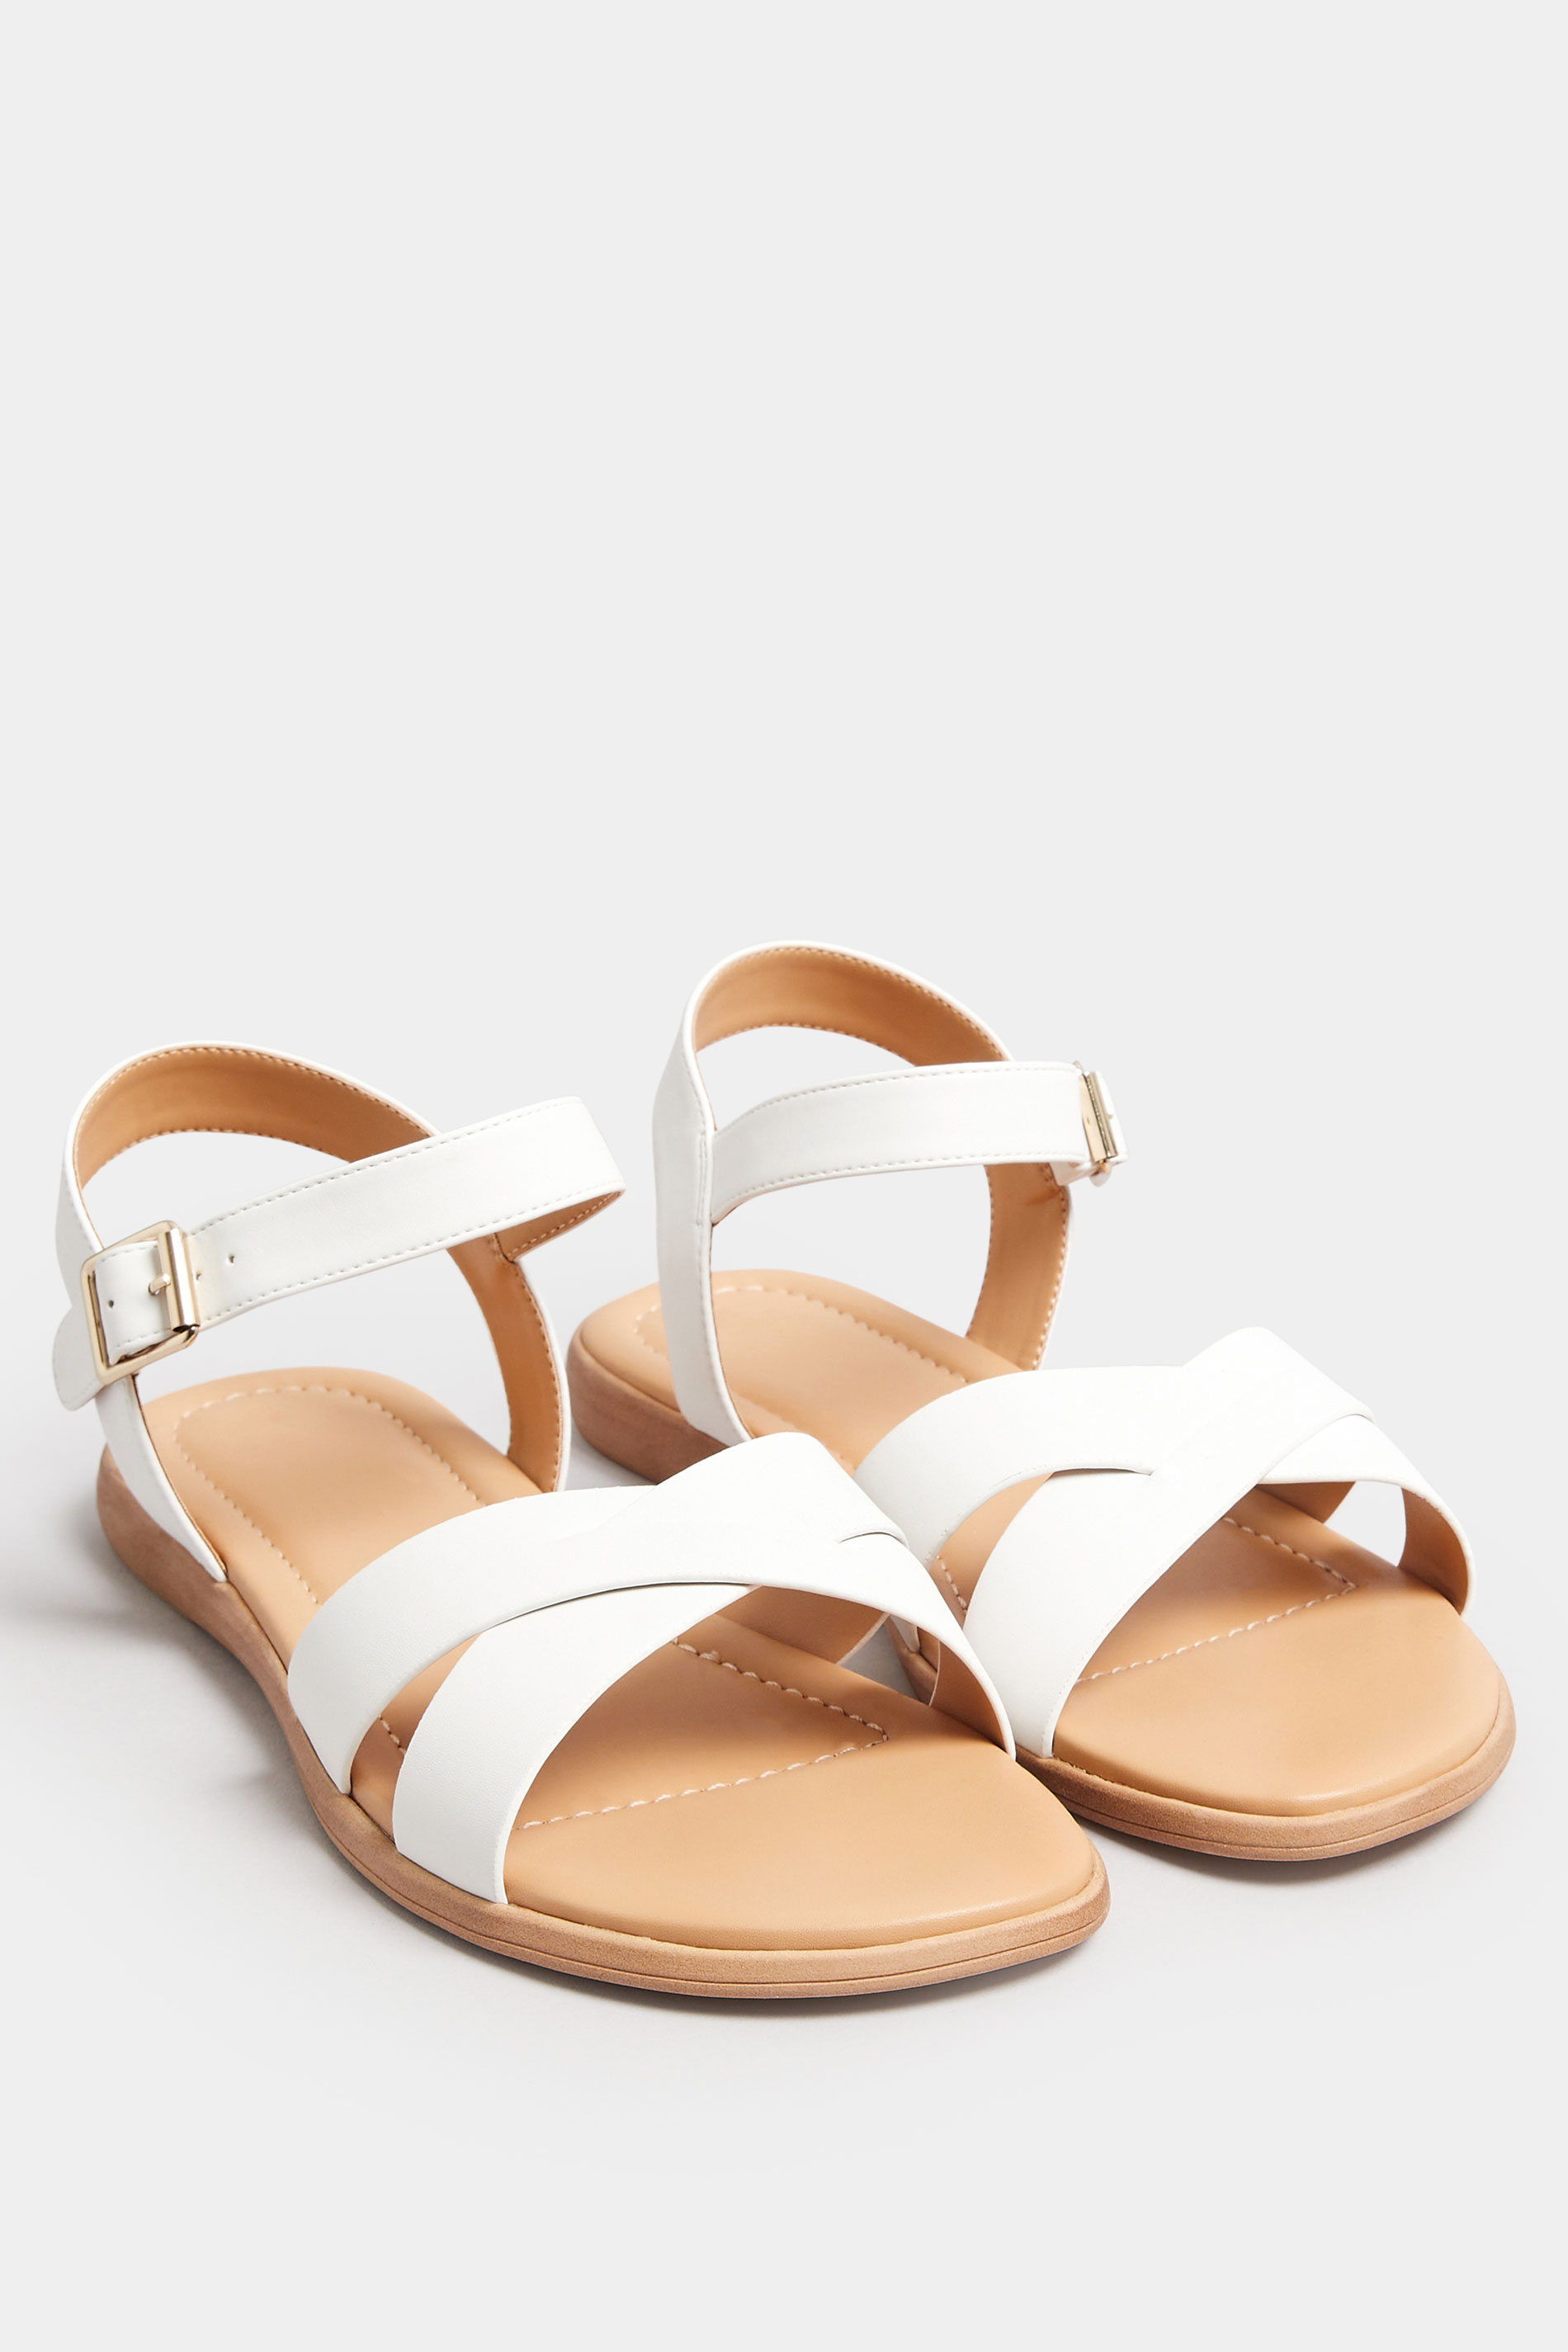 White Cross Strap Sandals In Extra Wide EEE Fit | Yours Clothing 2